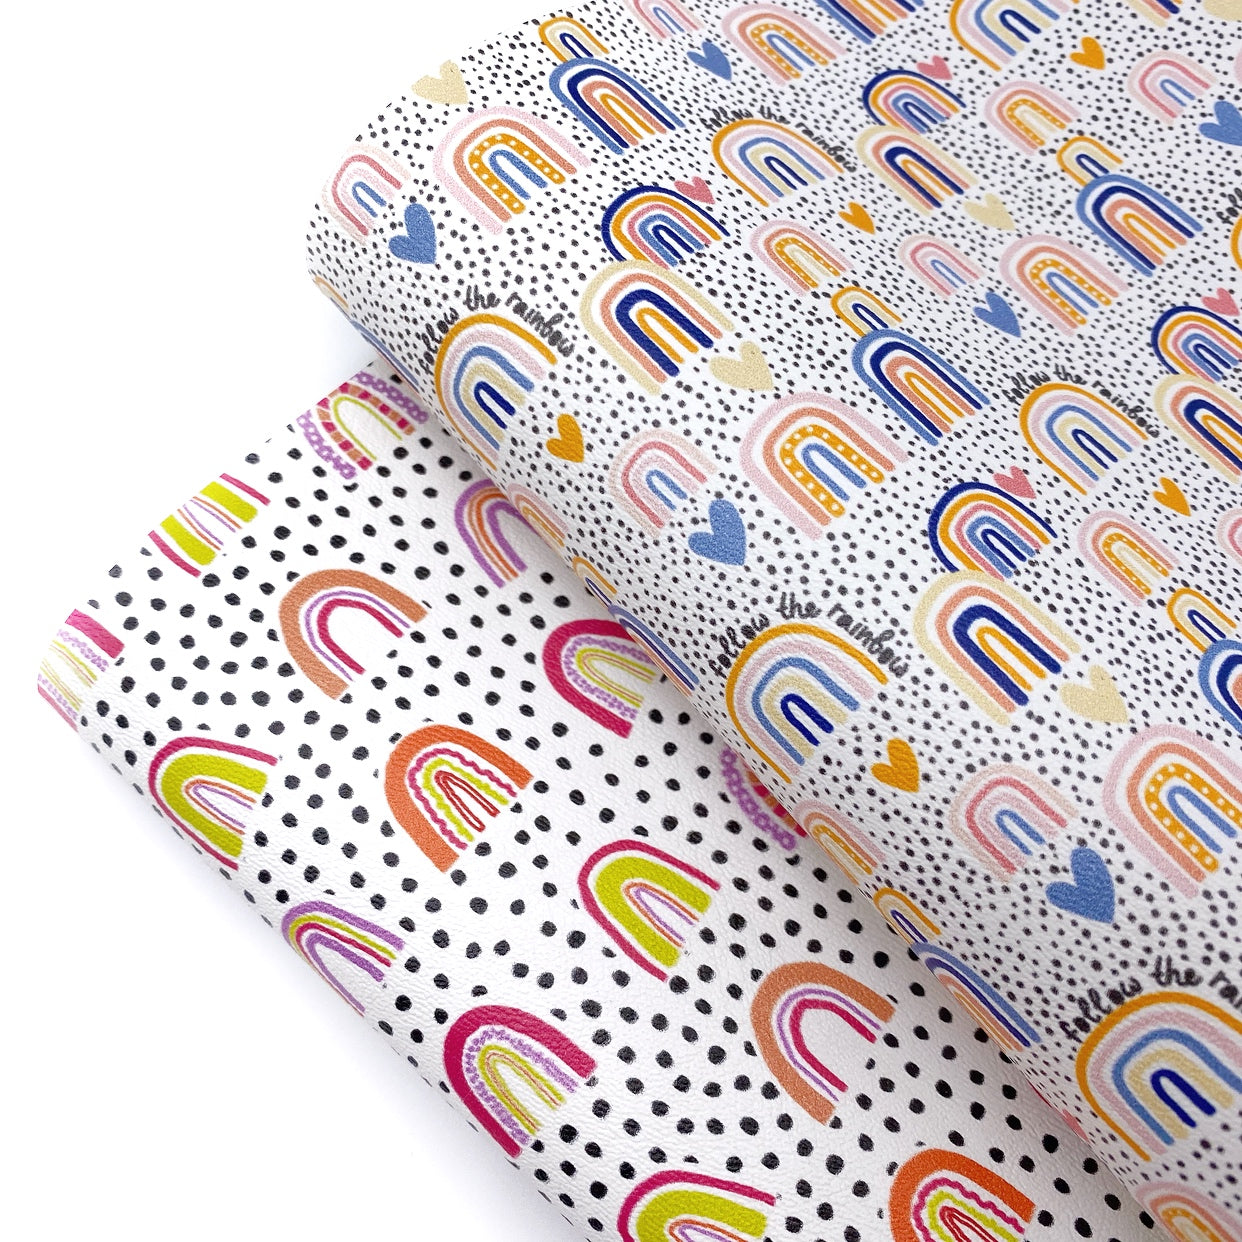 Follow the Spotty Rainbow Premium Faux Leather Fabric Sheets